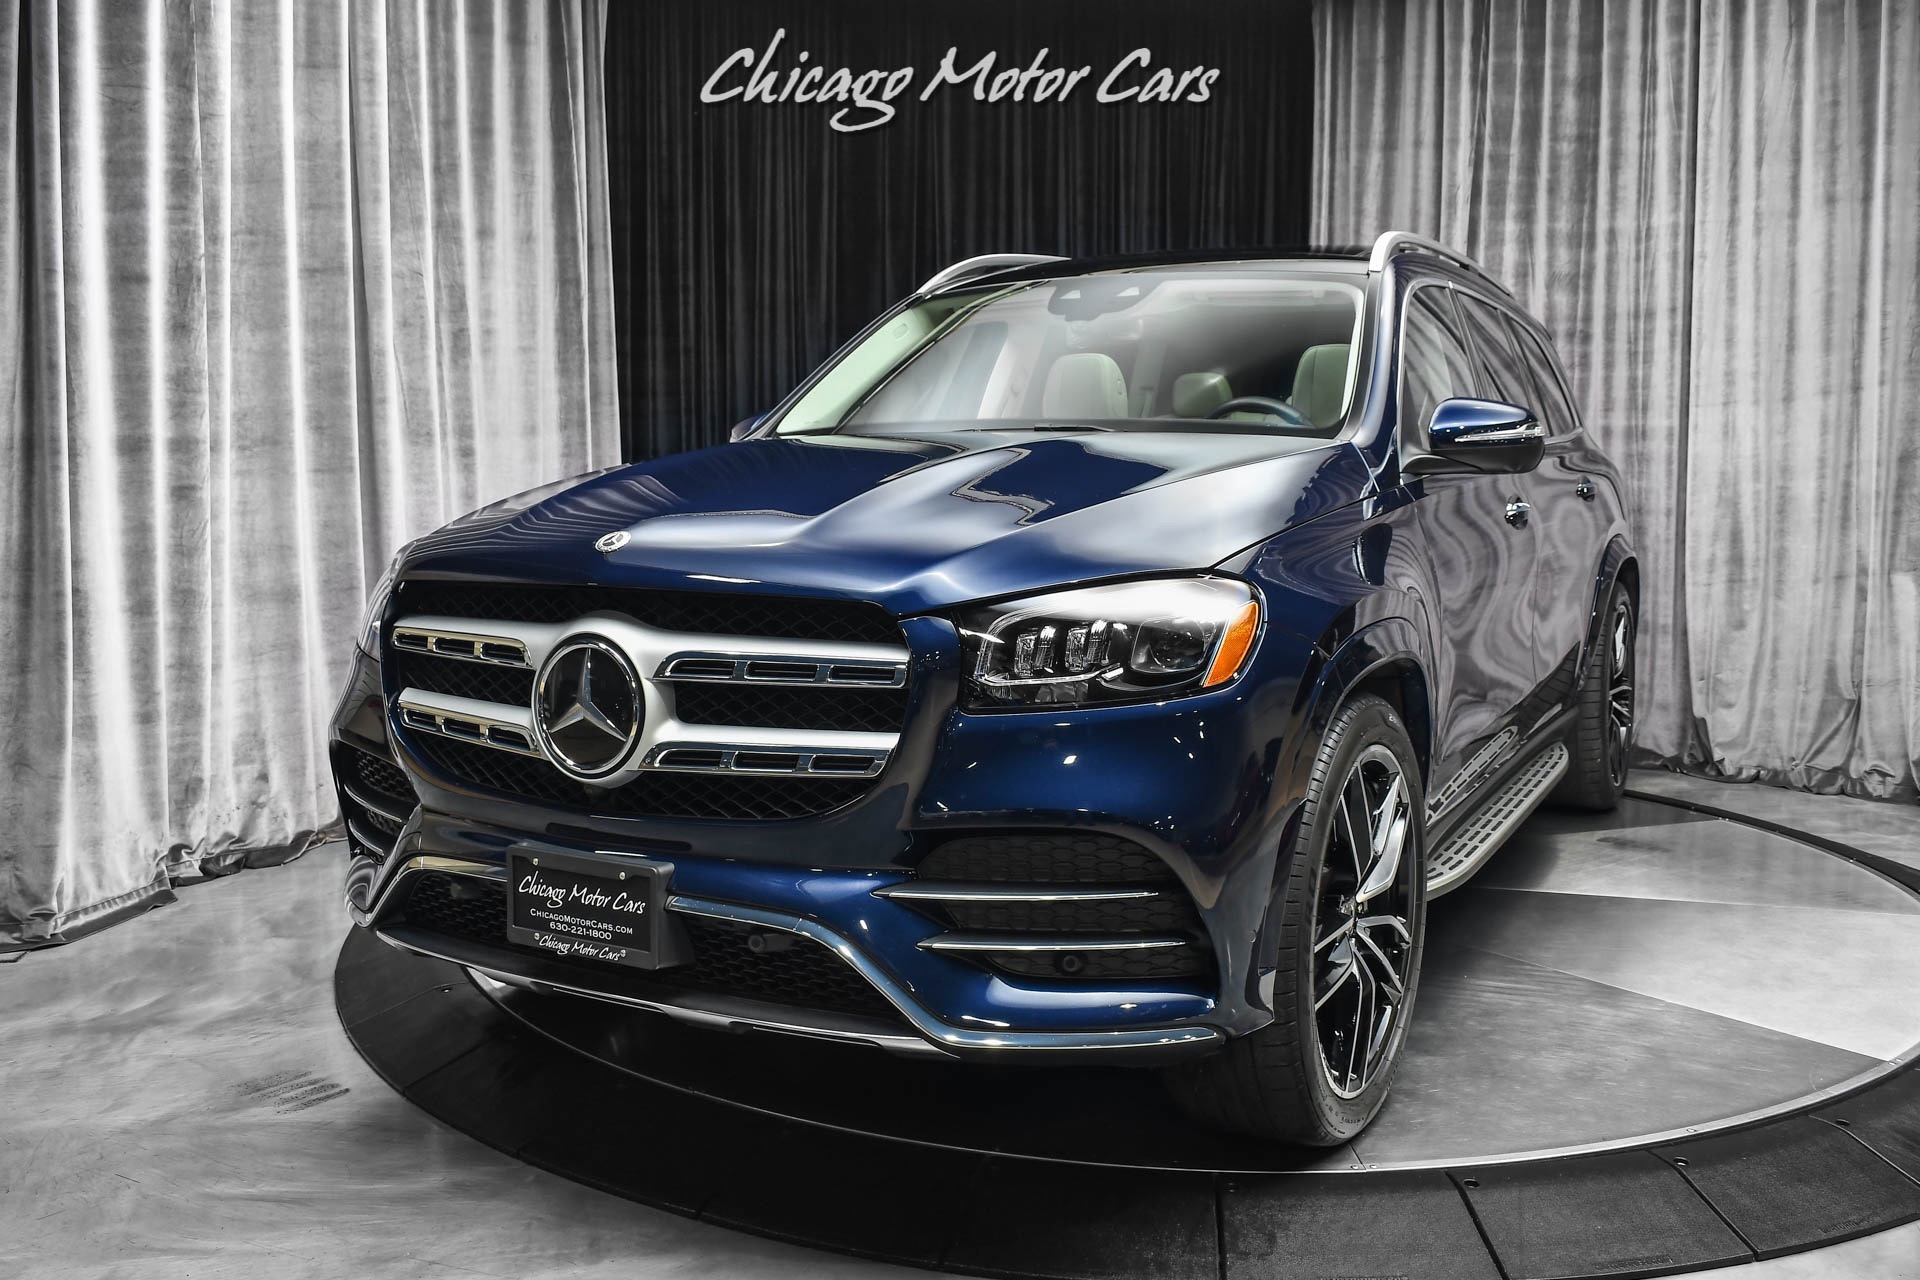 Used-2021-Mercedes-Benz-GLS580-4Matic-Driver-Assistance-Pkg-Plus-Pano-Roof-Gorgeous-Color-Combo-Third-Row